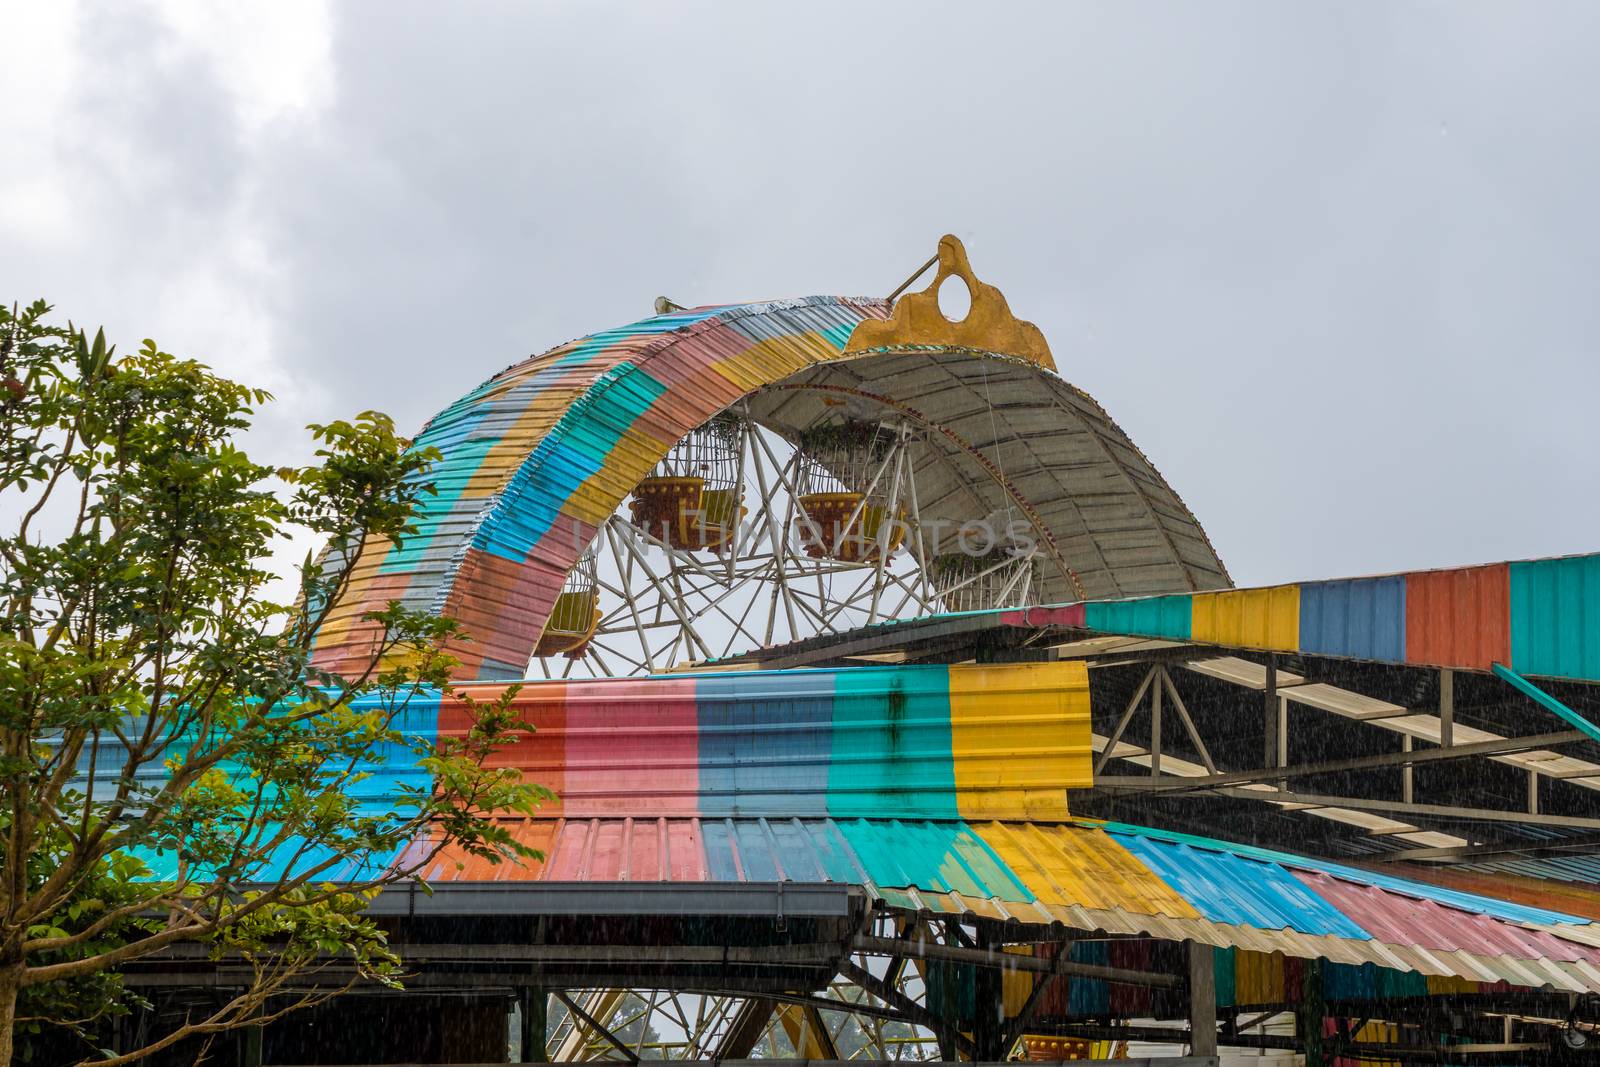 Amusement park old giant wheel colorful tin roof during heavy monsoon